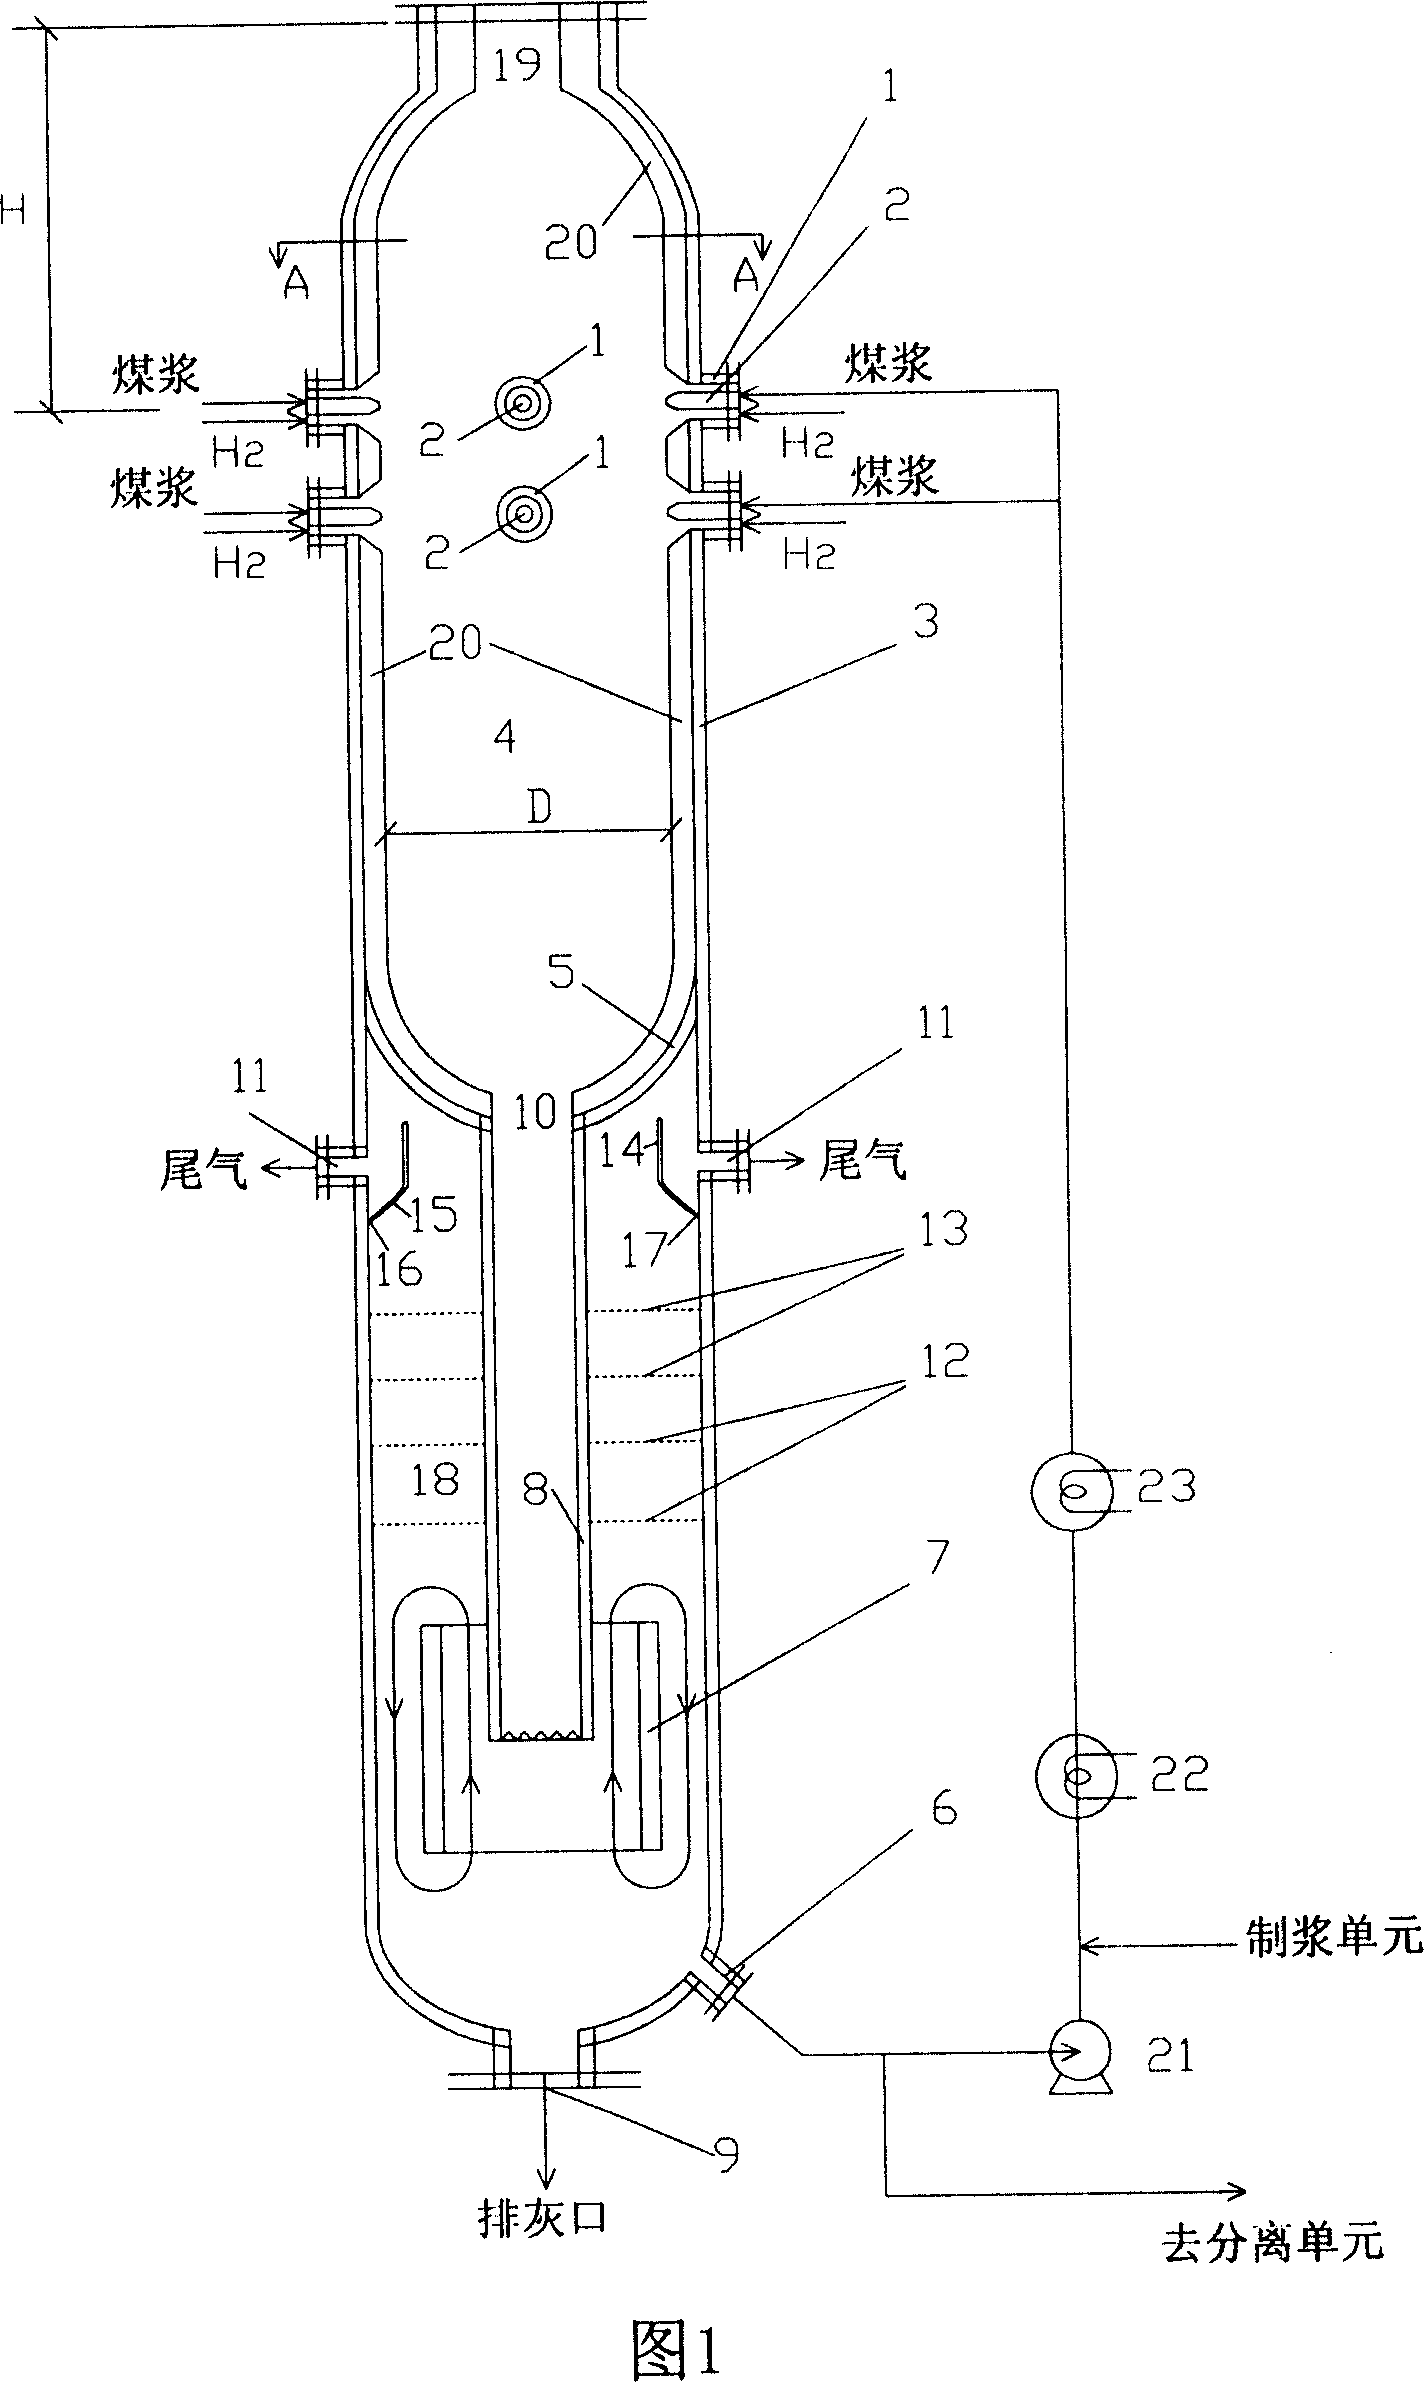 Coal hydrogenation reaction device and its industrial application